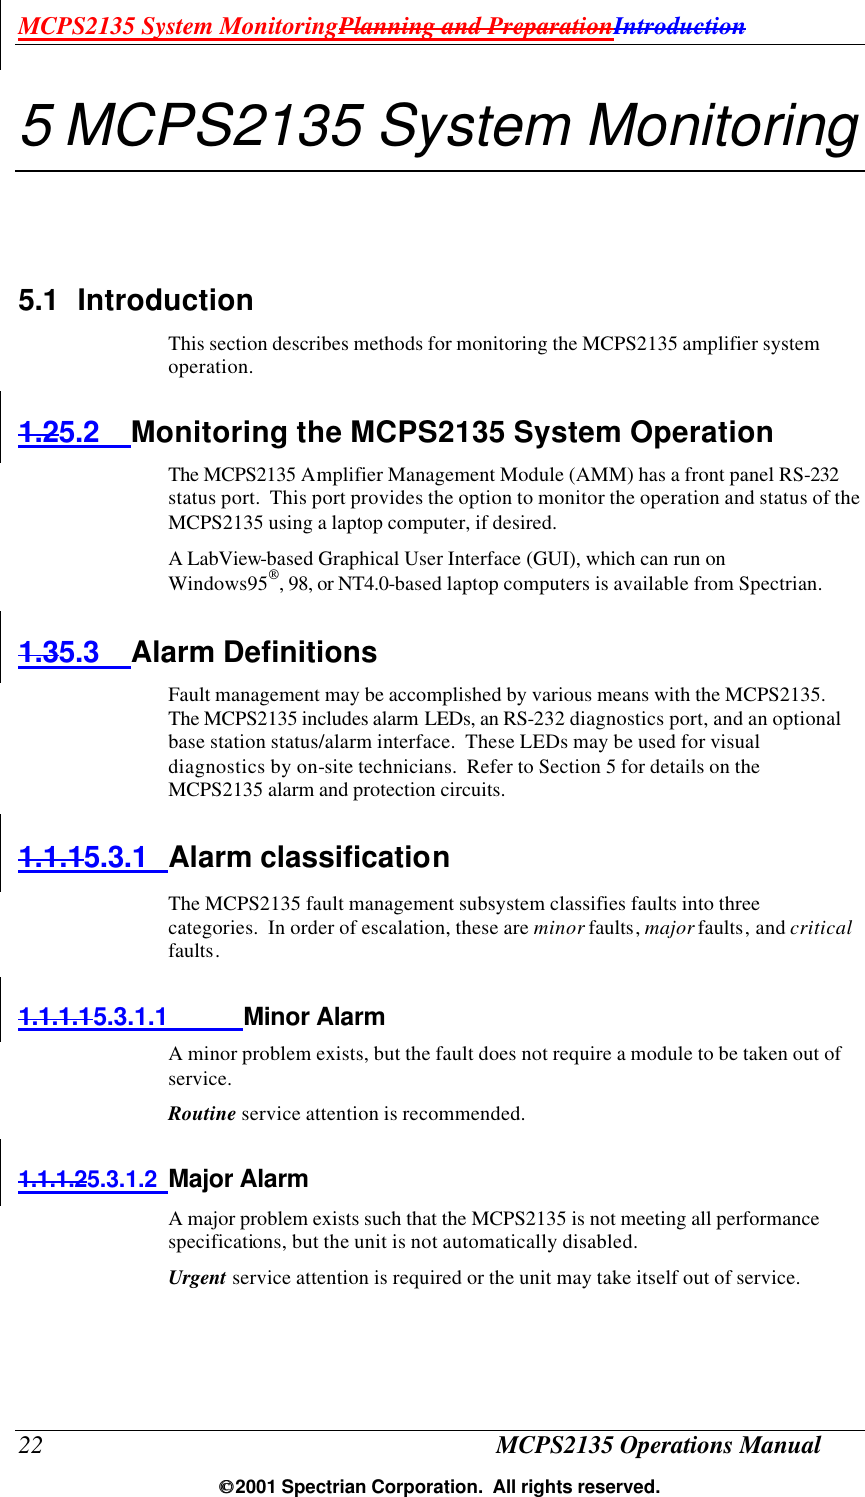 MCPS2135 System MonitoringPlanning and PreparationIntroduction 22 MCPS2135 Operations Manual  2001 Spectrian Corporation.  All rights reserved. 5 MCPS2135 System Monitoring 5.1 Introduction This section describes methods for monitoring the MCPS2135 amplifier system operation. 1.25.2 Monitoring the MCPS2135 System Operation The MCPS2135 Amplifier Management Module (AMM) has a front panel RS-232 status port.  This port provides the option to monitor the operation and status of the MCPS2135 using a laptop computer, if desired. A LabView-based Graphical User Interface (GUI), which can run on Windows95, 98, or NT4.0-based laptop computers is available from Spectrian. 1.35.3 Alarm Definitions Fault management may be accomplished by various means with the MCPS2135.  The MCPS2135 includes alarm LEDs, an RS-232 diagnostics port, and an optional base station status/alarm interface.  These LEDs may be used for visual diagnostics by on-site technicians.  Refer to Section 5 for details on the MCPS2135 alarm and protection circuits. 1.1.15.3.1 Alarm classification The MCPS2135 fault management subsystem classifies faults into three categories.  In order of escalation, these are minor faults, major faults, and critical faults. 1.1.1.15.3.1.1 Minor Alarm A minor problem exists, but the fault does not require a module to be taken out of service. Routine service attention is recommended. 1.1.1.25.3.1.2 Major Alarm A major problem exists such that the MCPS2135 is not meeting all performance specifications, but the unit is not automatically disabled. Urgent service attention is required or the unit may take itself out of service. 